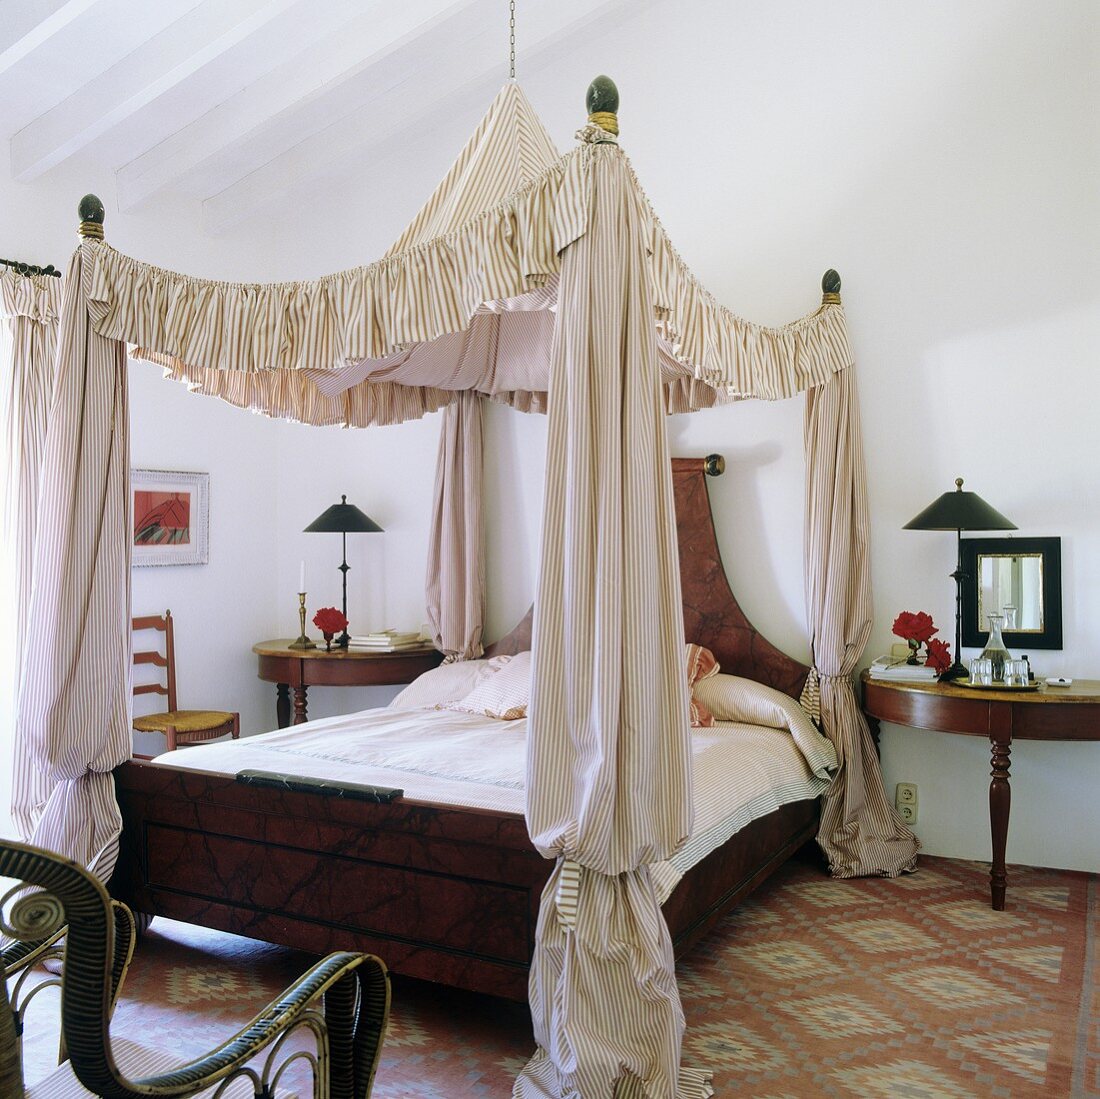 A tent-style canopy above an antique wooden bed and a bedside table on a patterned carpet